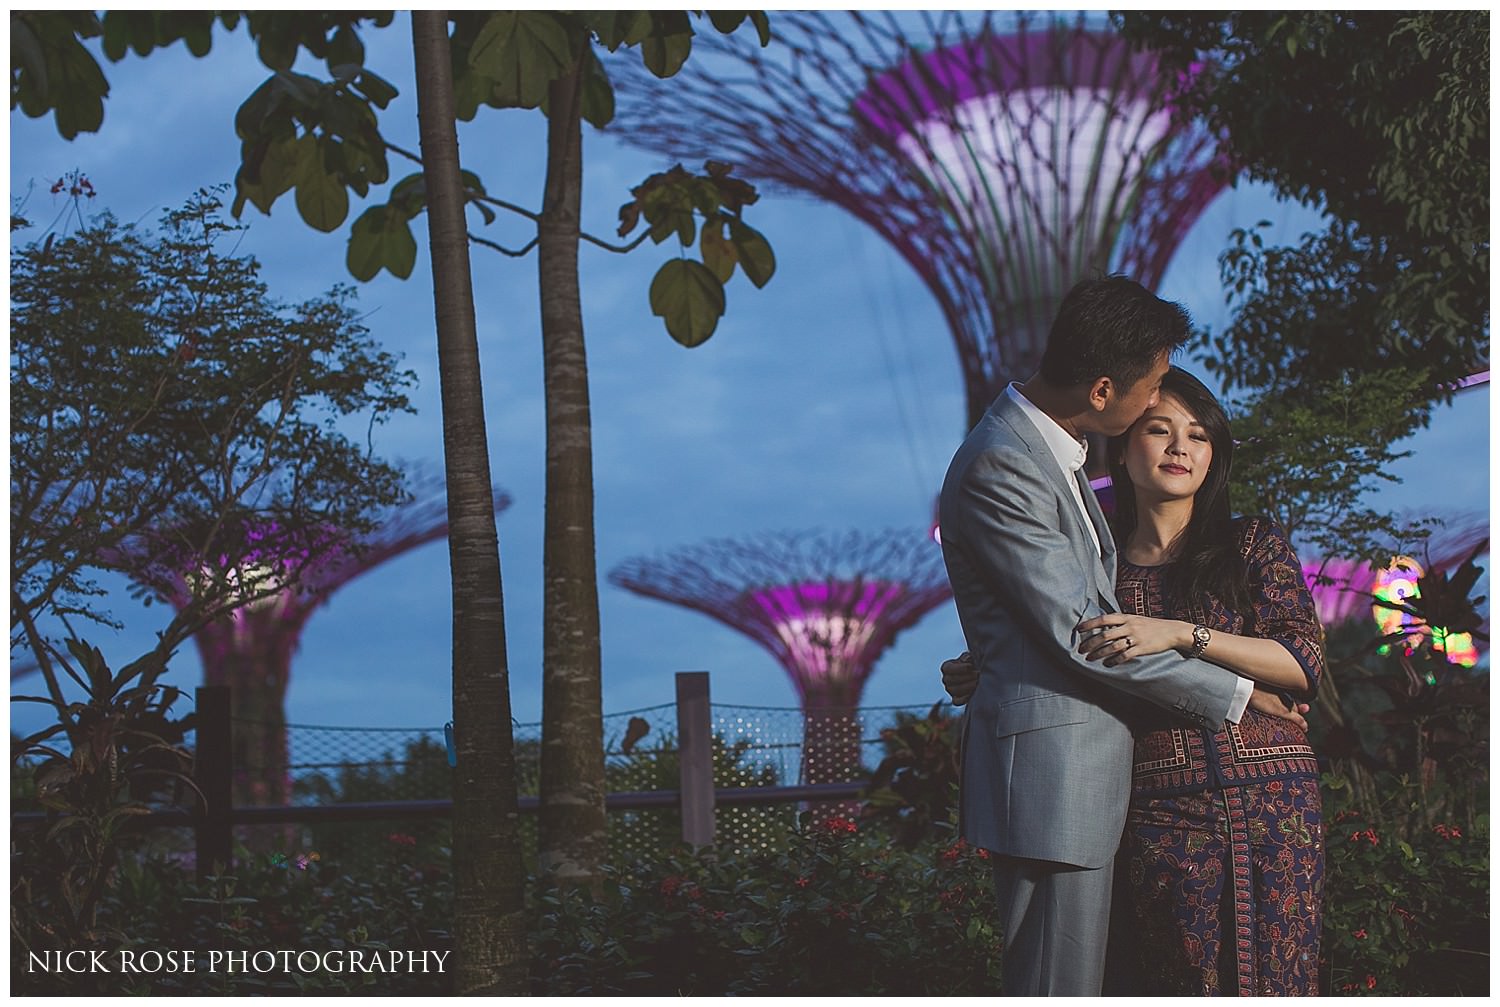  Night time pre wedding photography at Gardens by the Bay in Singapore 